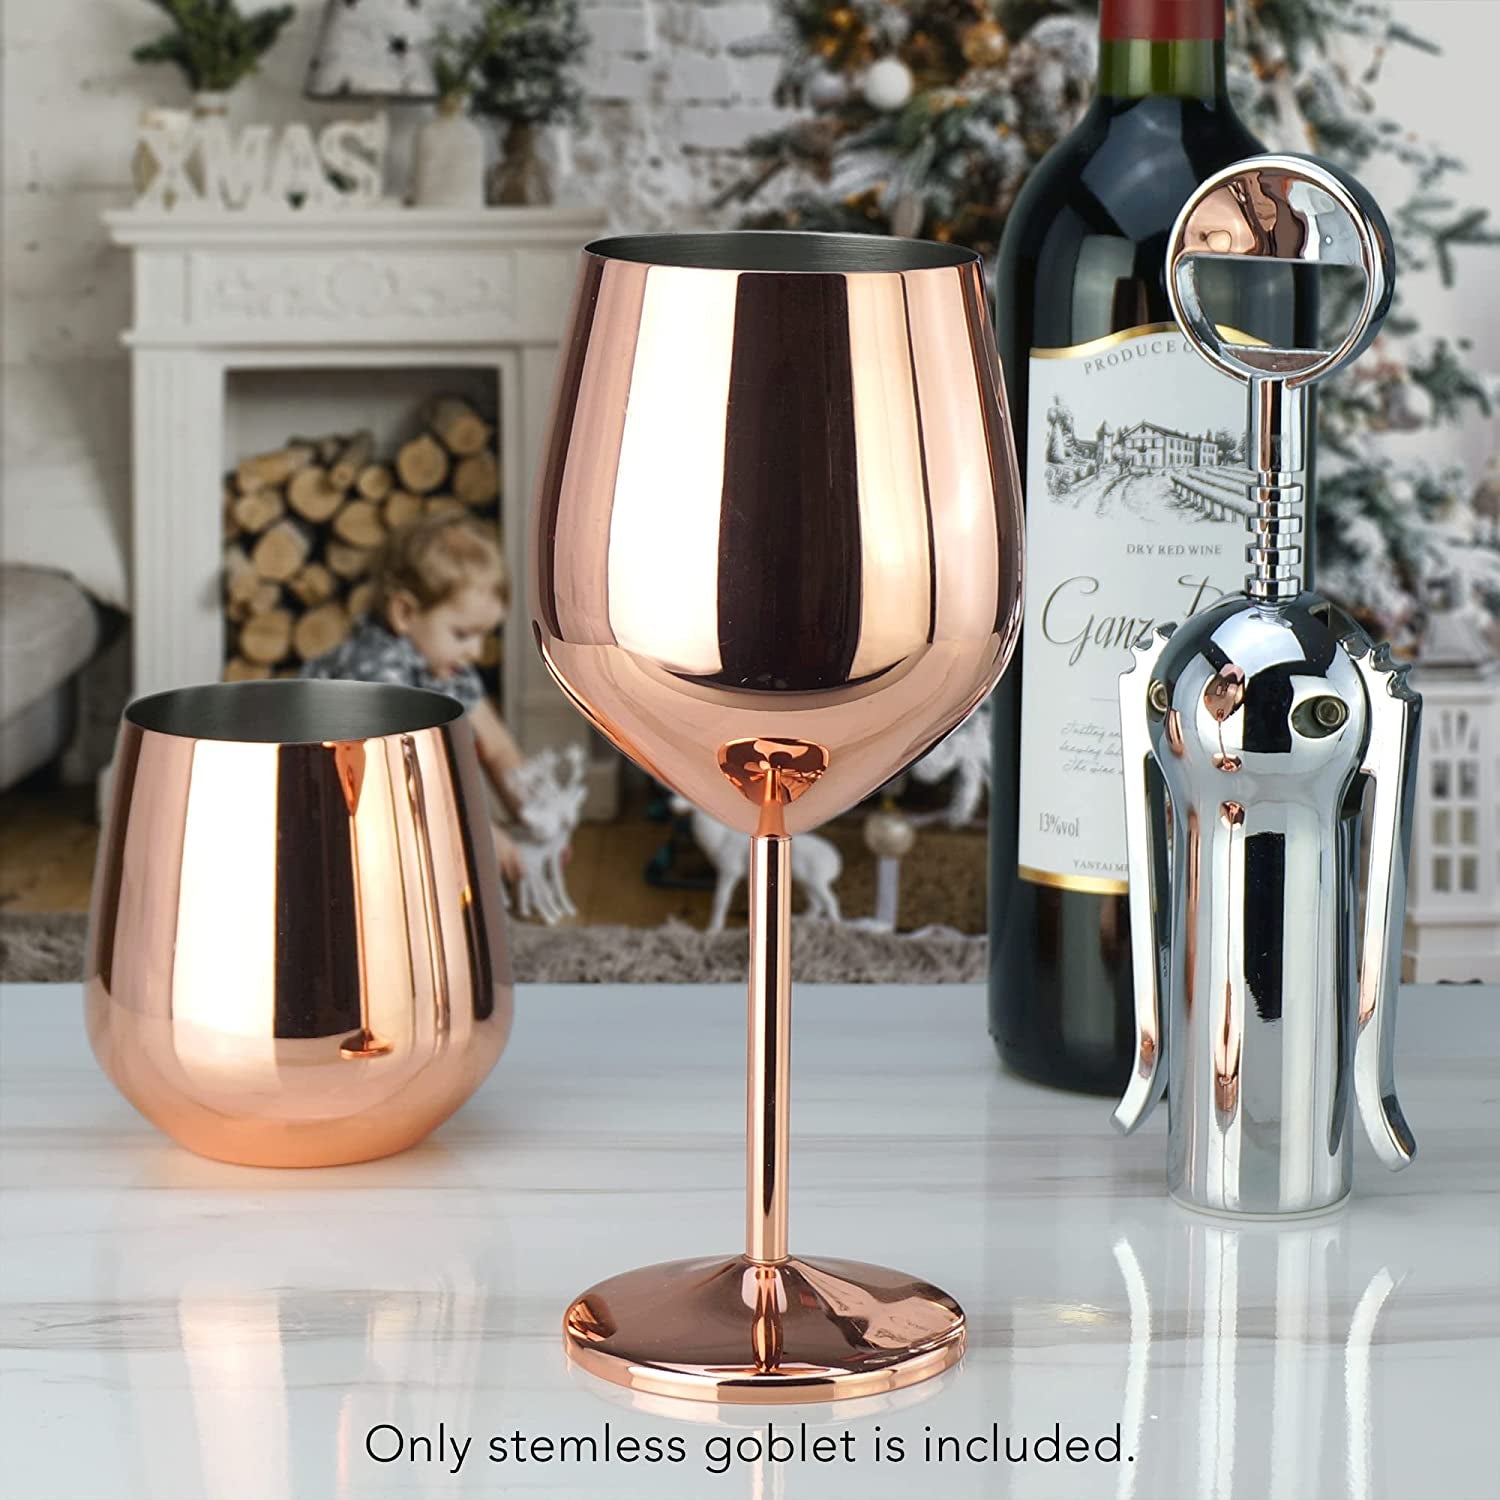 Professional Title: "Elegant Set of 4 Stainless Steel Wine Glasses with Copper/Rose Gold Stem - 18.5 Oz Capacity"